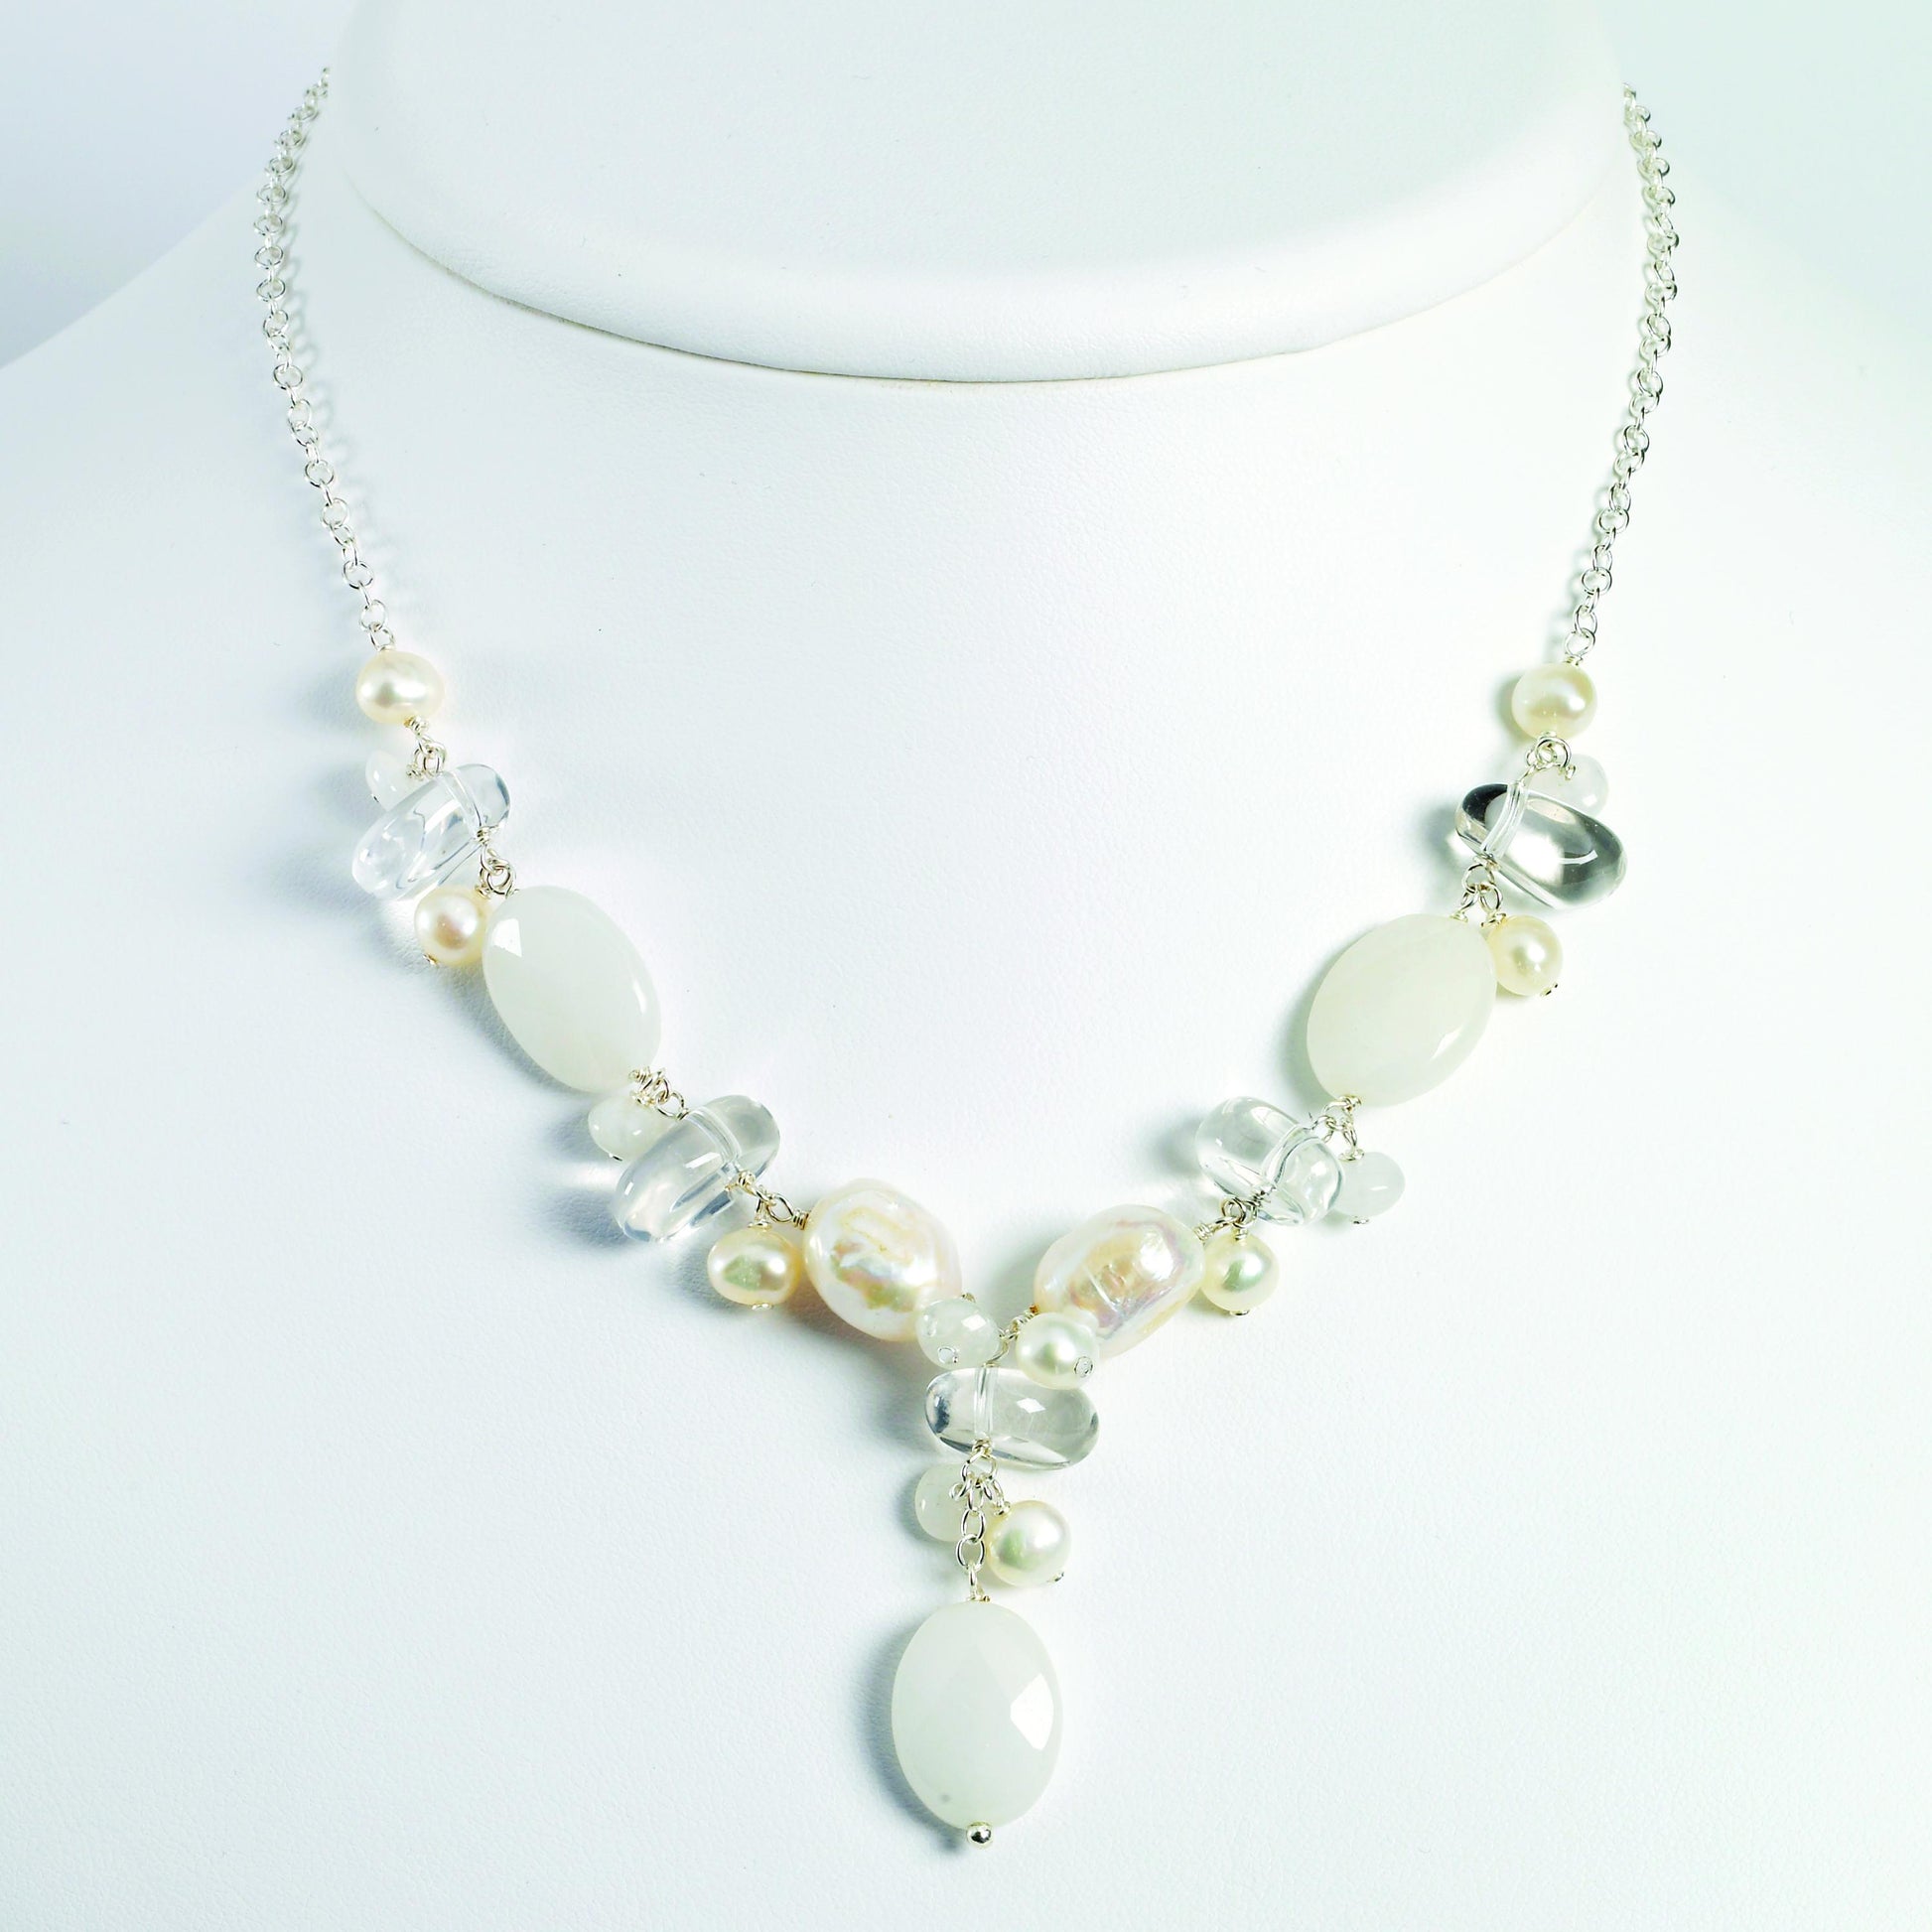 Sterling Silver Moonstone/FW Cult Pearl/Rock Qtz/White Jade Necklace